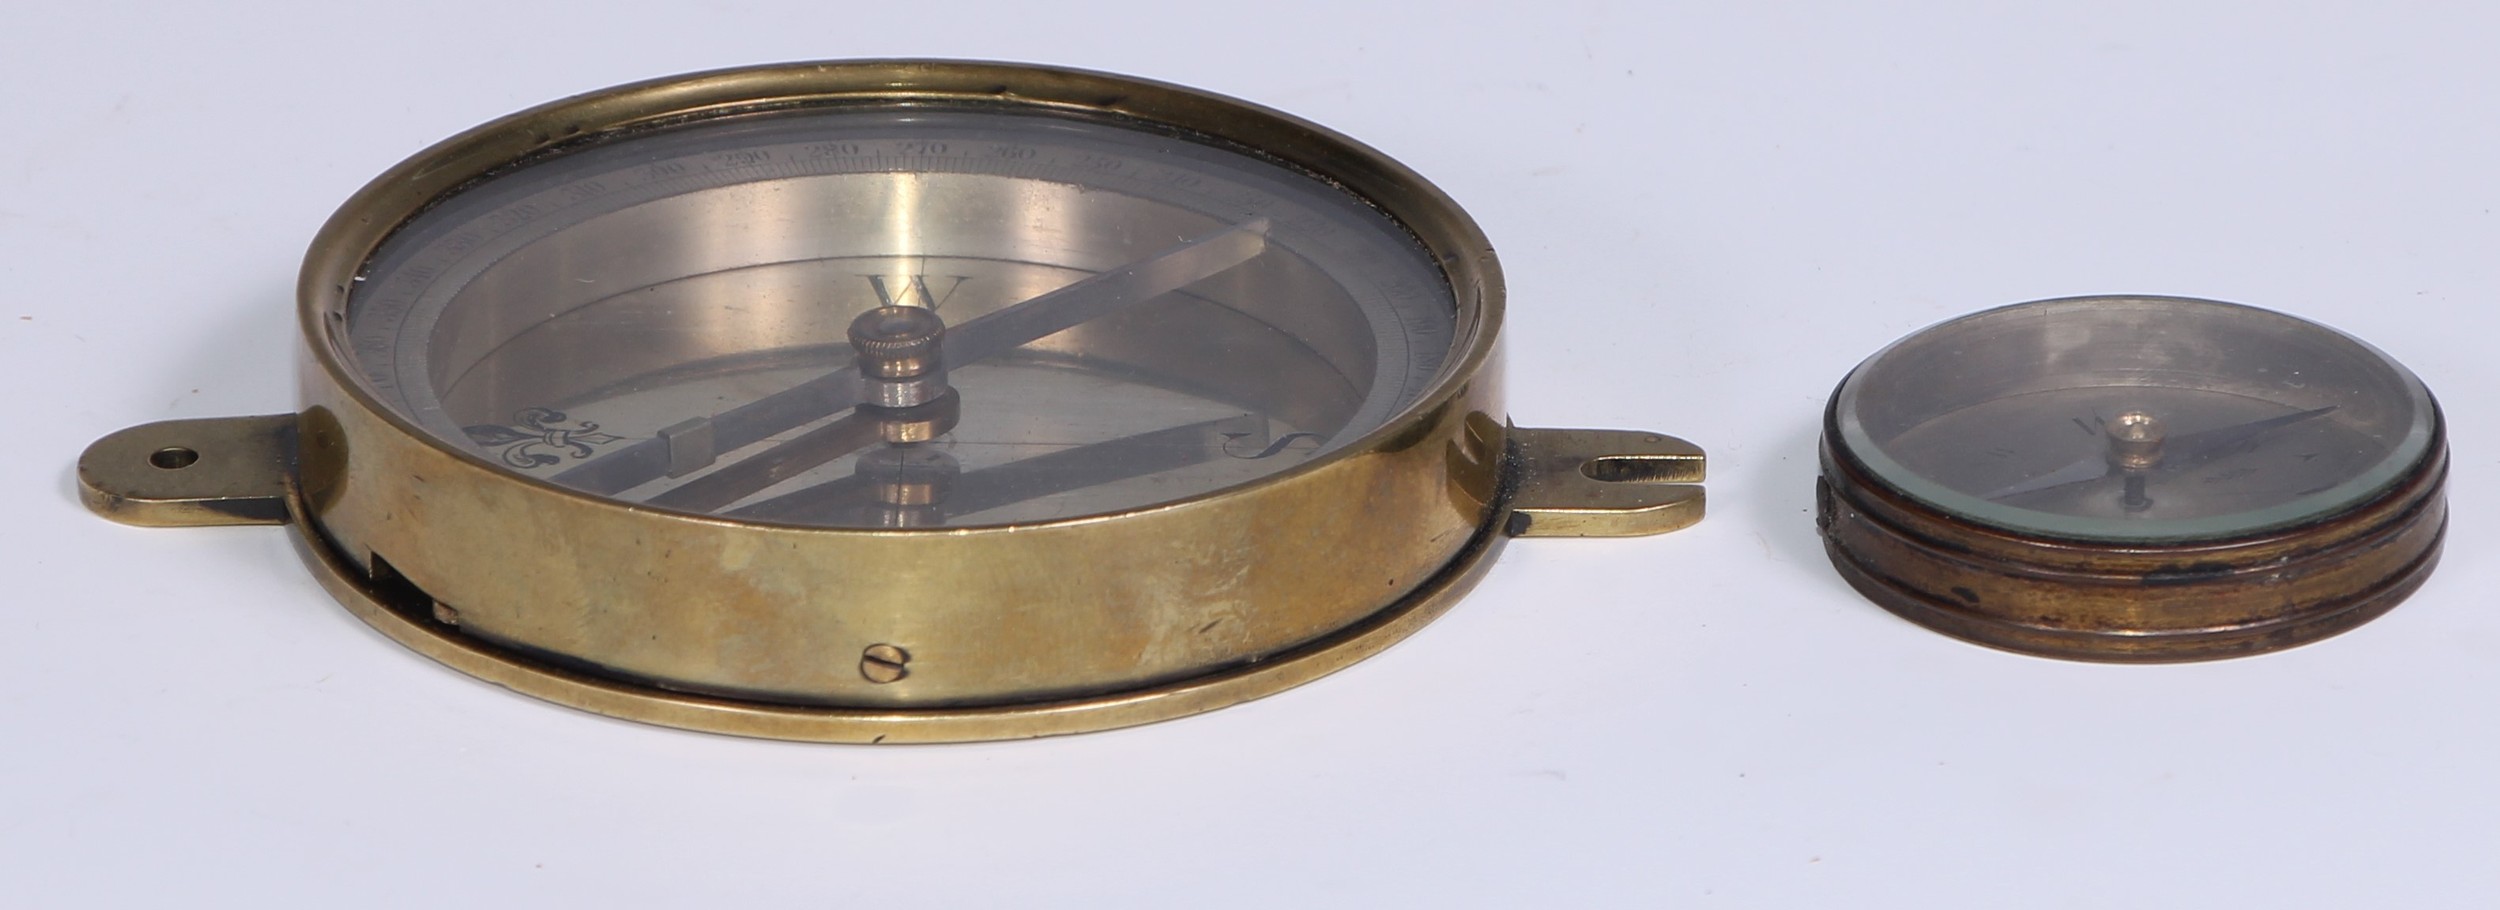 A 19th century brass compass, 8.5cm silvered dial engraved with fleur-de-lys, lockable needle,